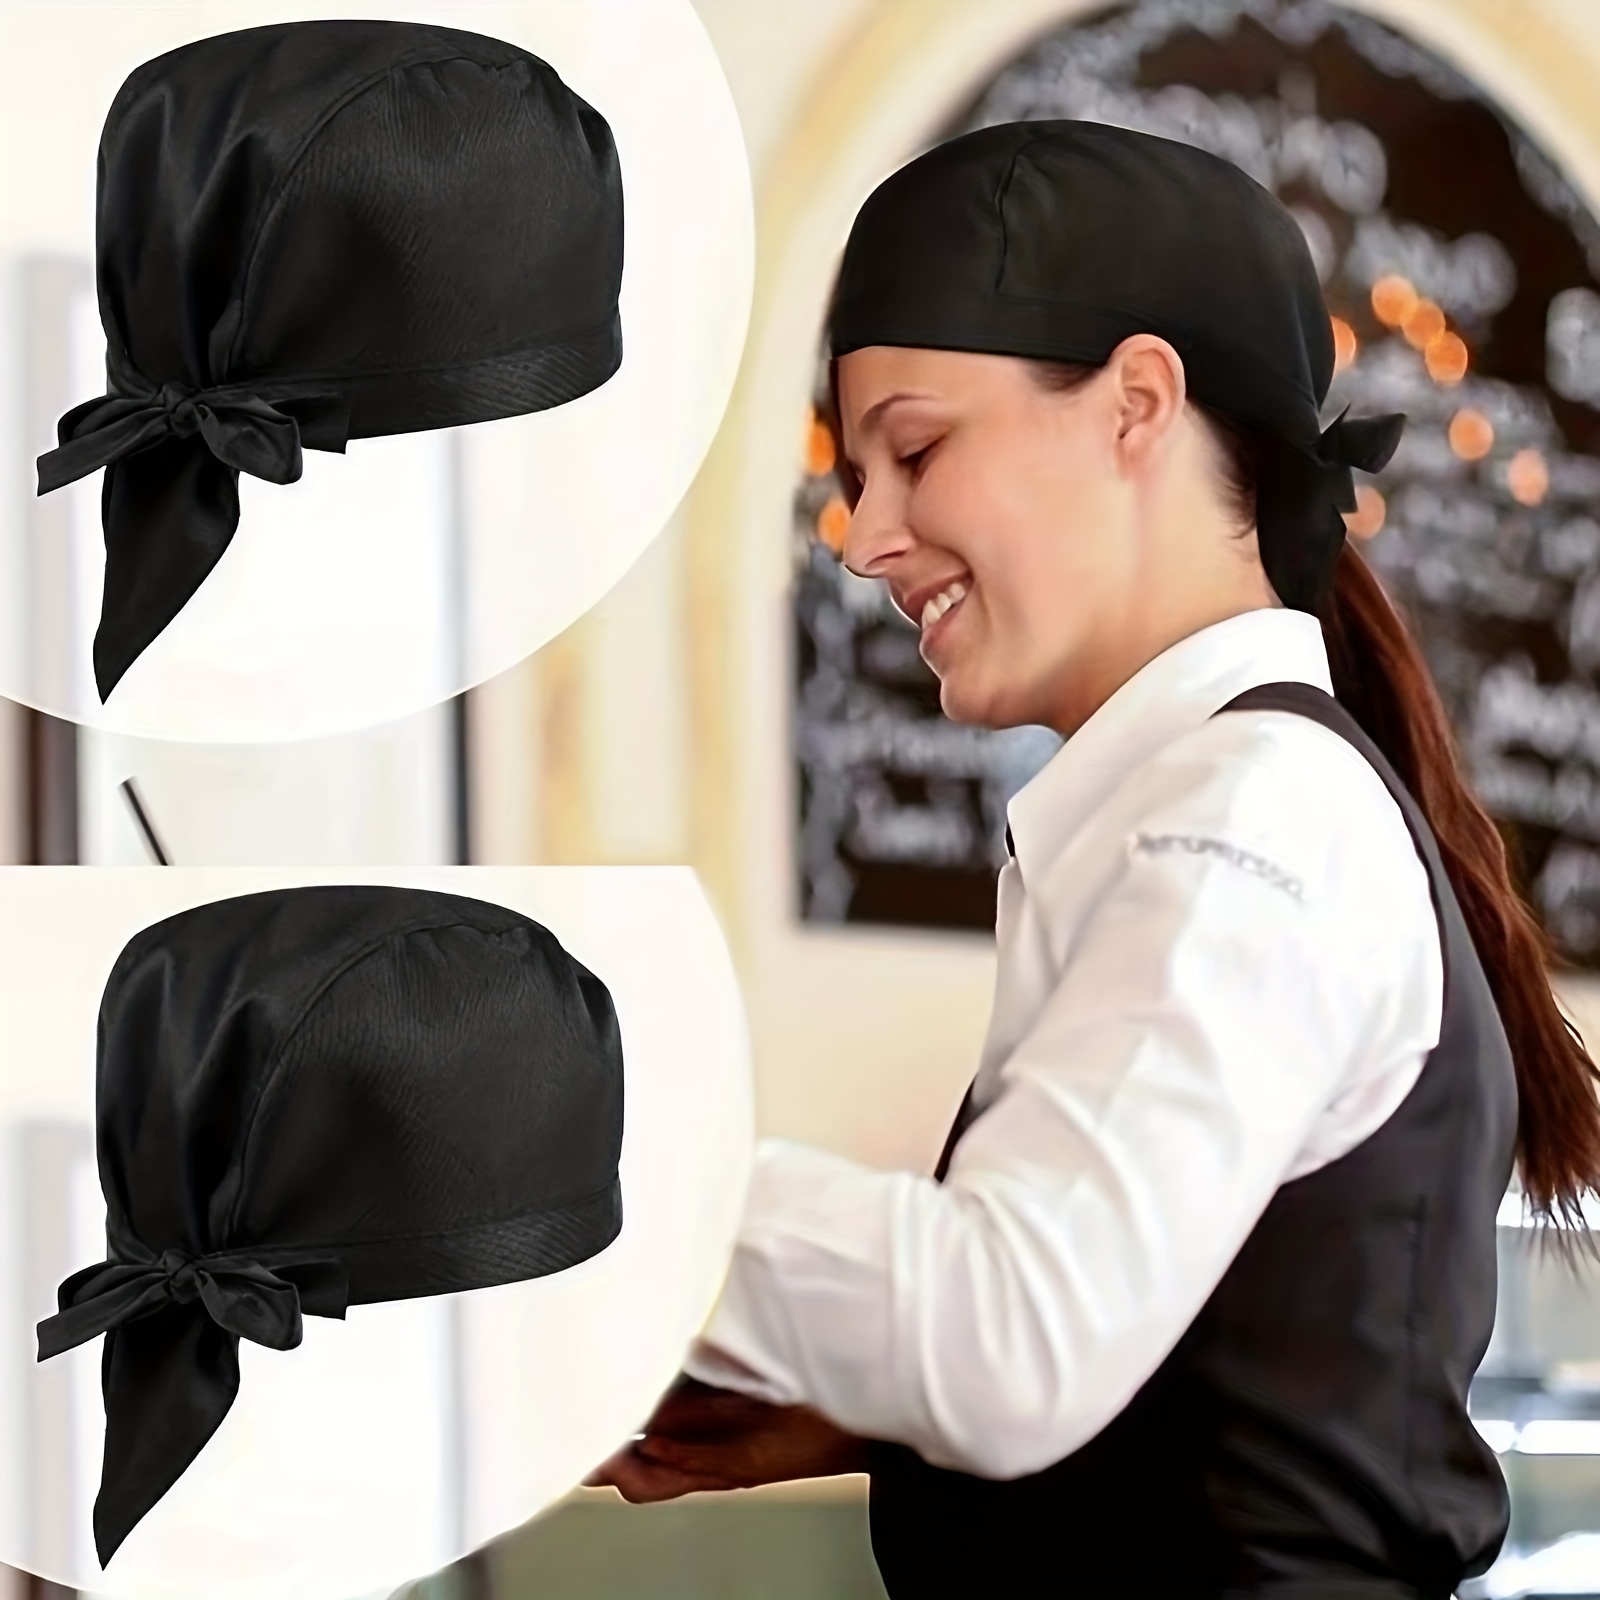 

2pcs, Adults Chef Hat, Chef Cap For Men Women, Adjustable Cooking Hat With Elastic Band, Reusable Chefs Hat, Professional For Kitchen Coffee Restaurant Food Service, Kitchen Supplies, Accessories